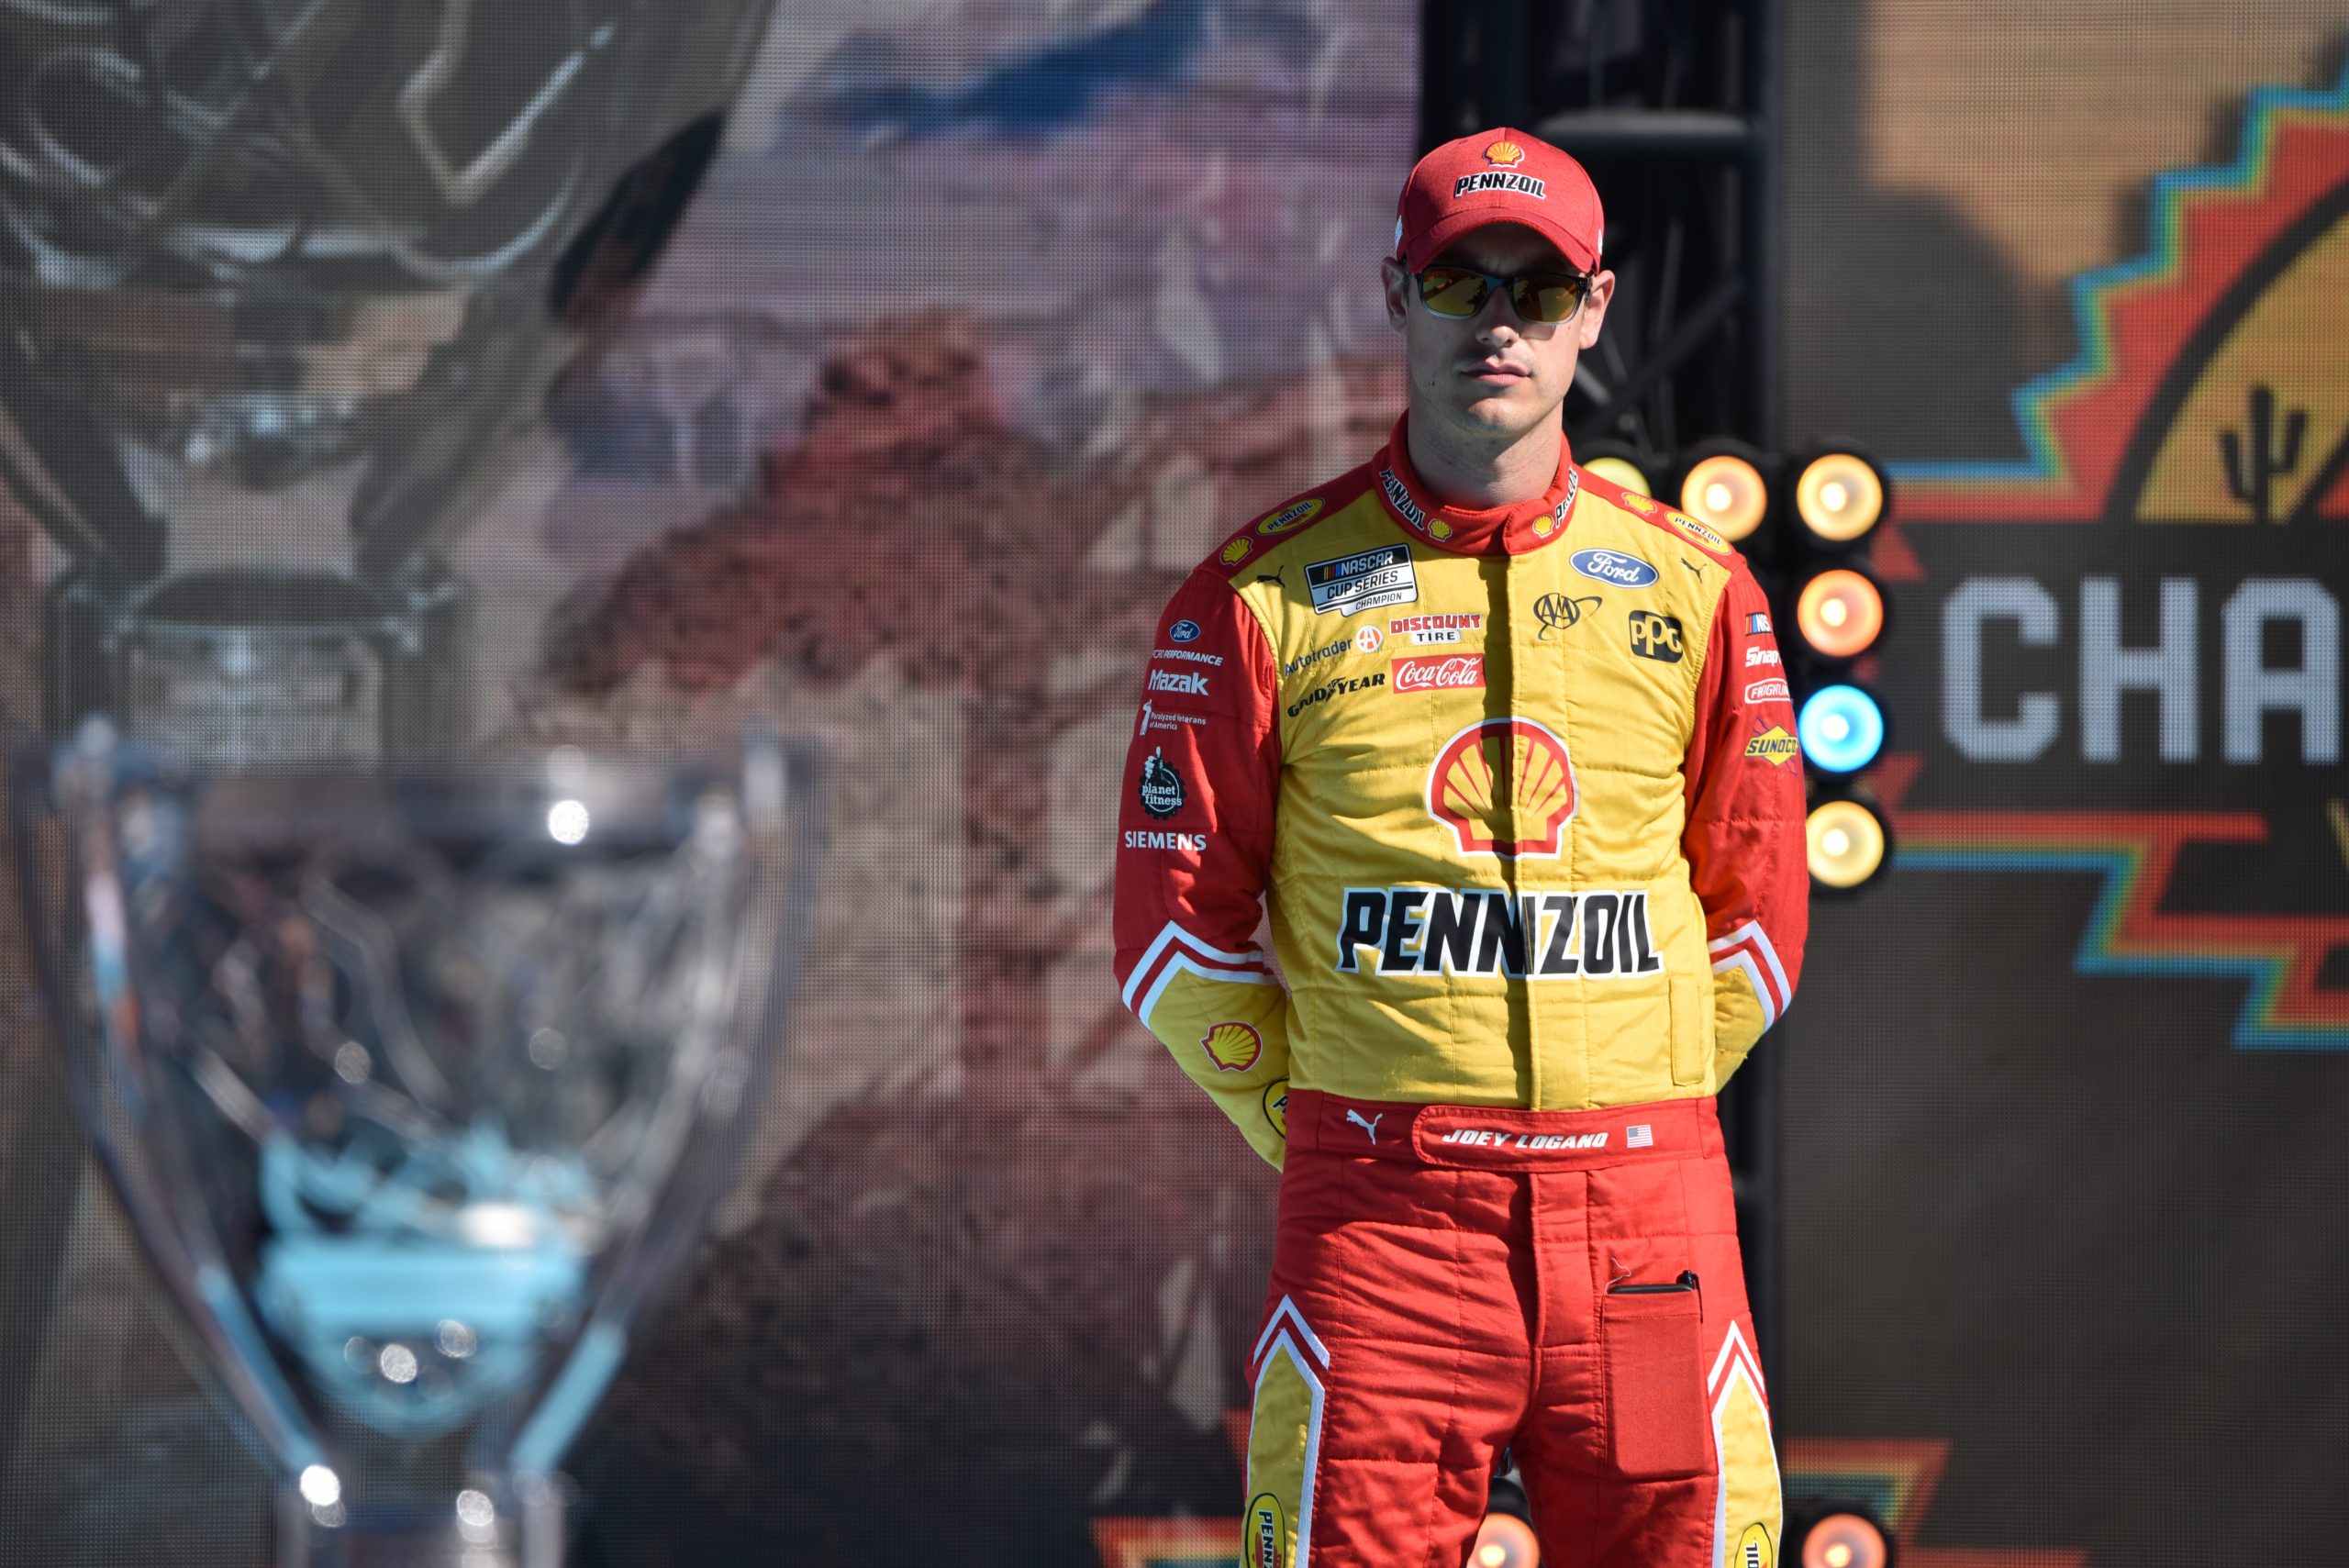 Following Brad Keselowski's departure after the 2021 season, Logano took on the de facto lead racer role at Team Penske. (Photo: Luis Torres | The Podium Finish)